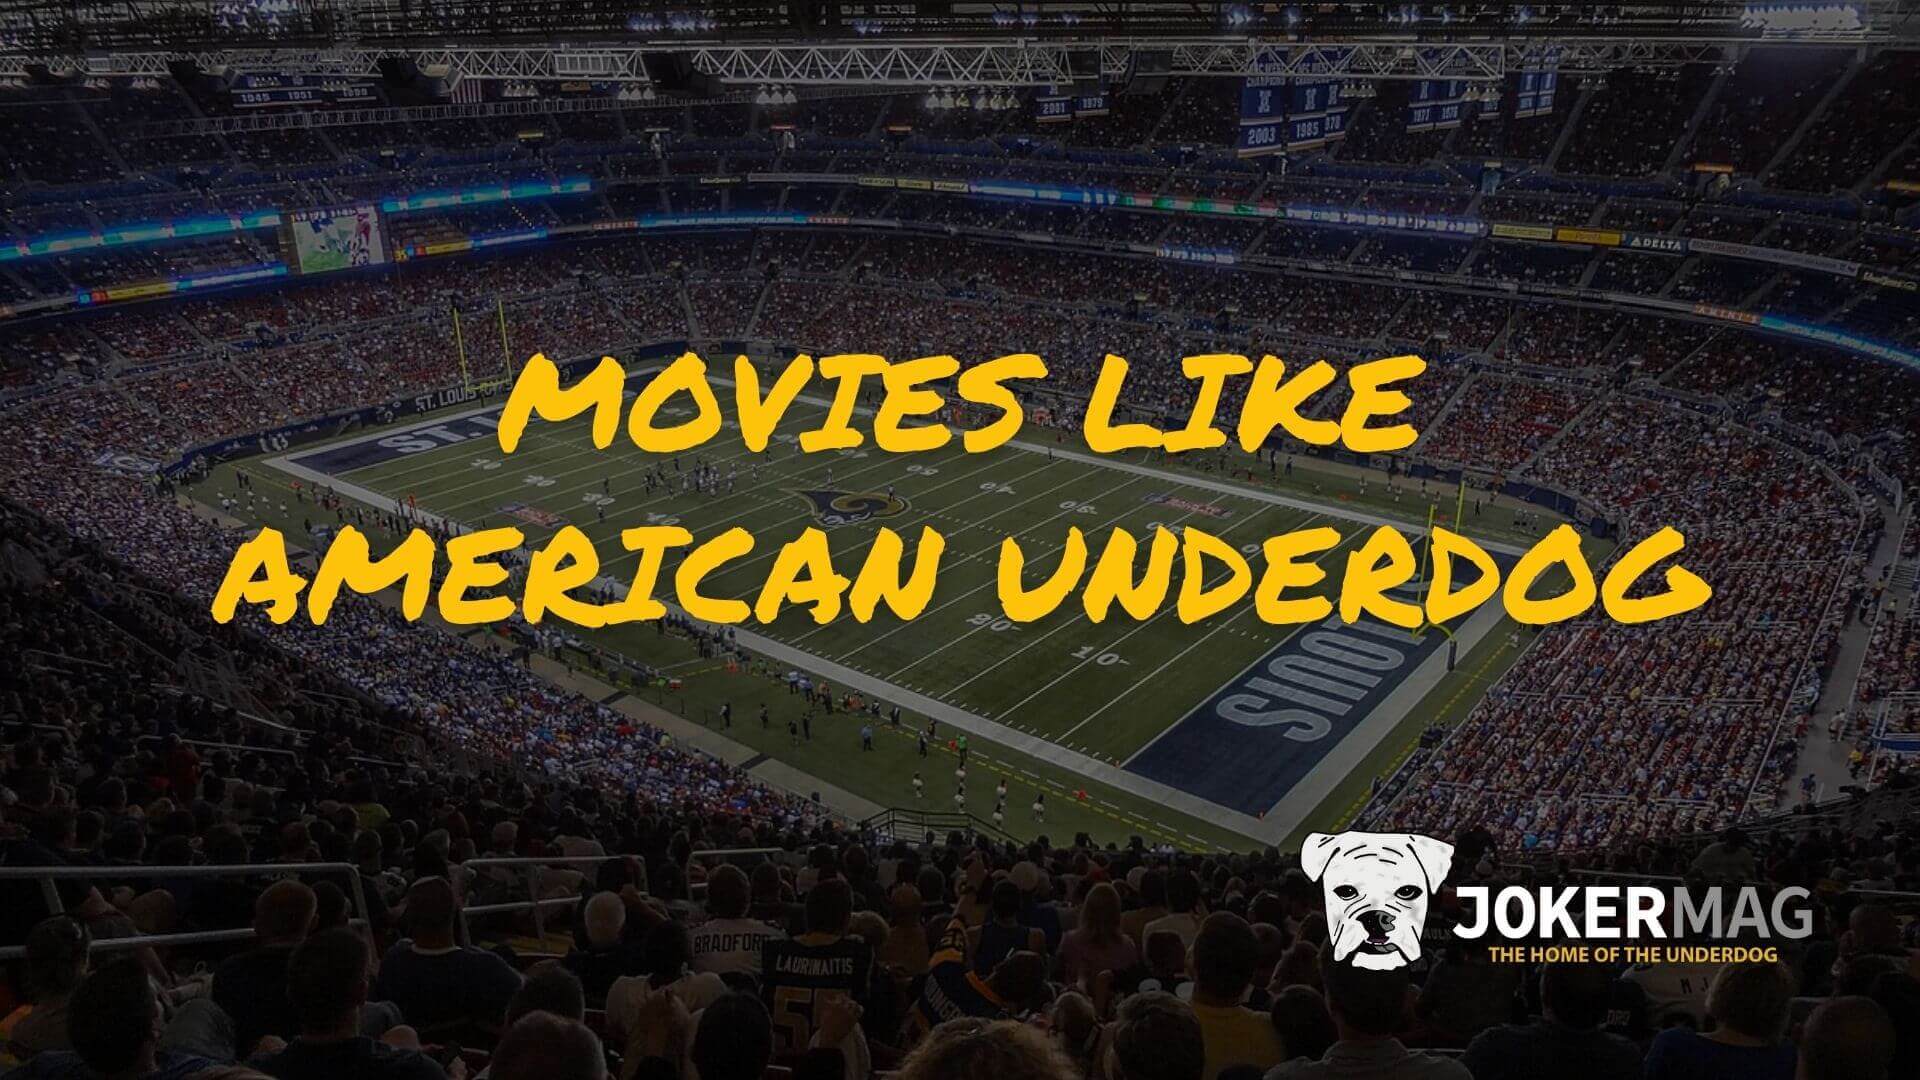 Five movies similar to American Underdog (2021), by Joker Mag - the home of the underdog